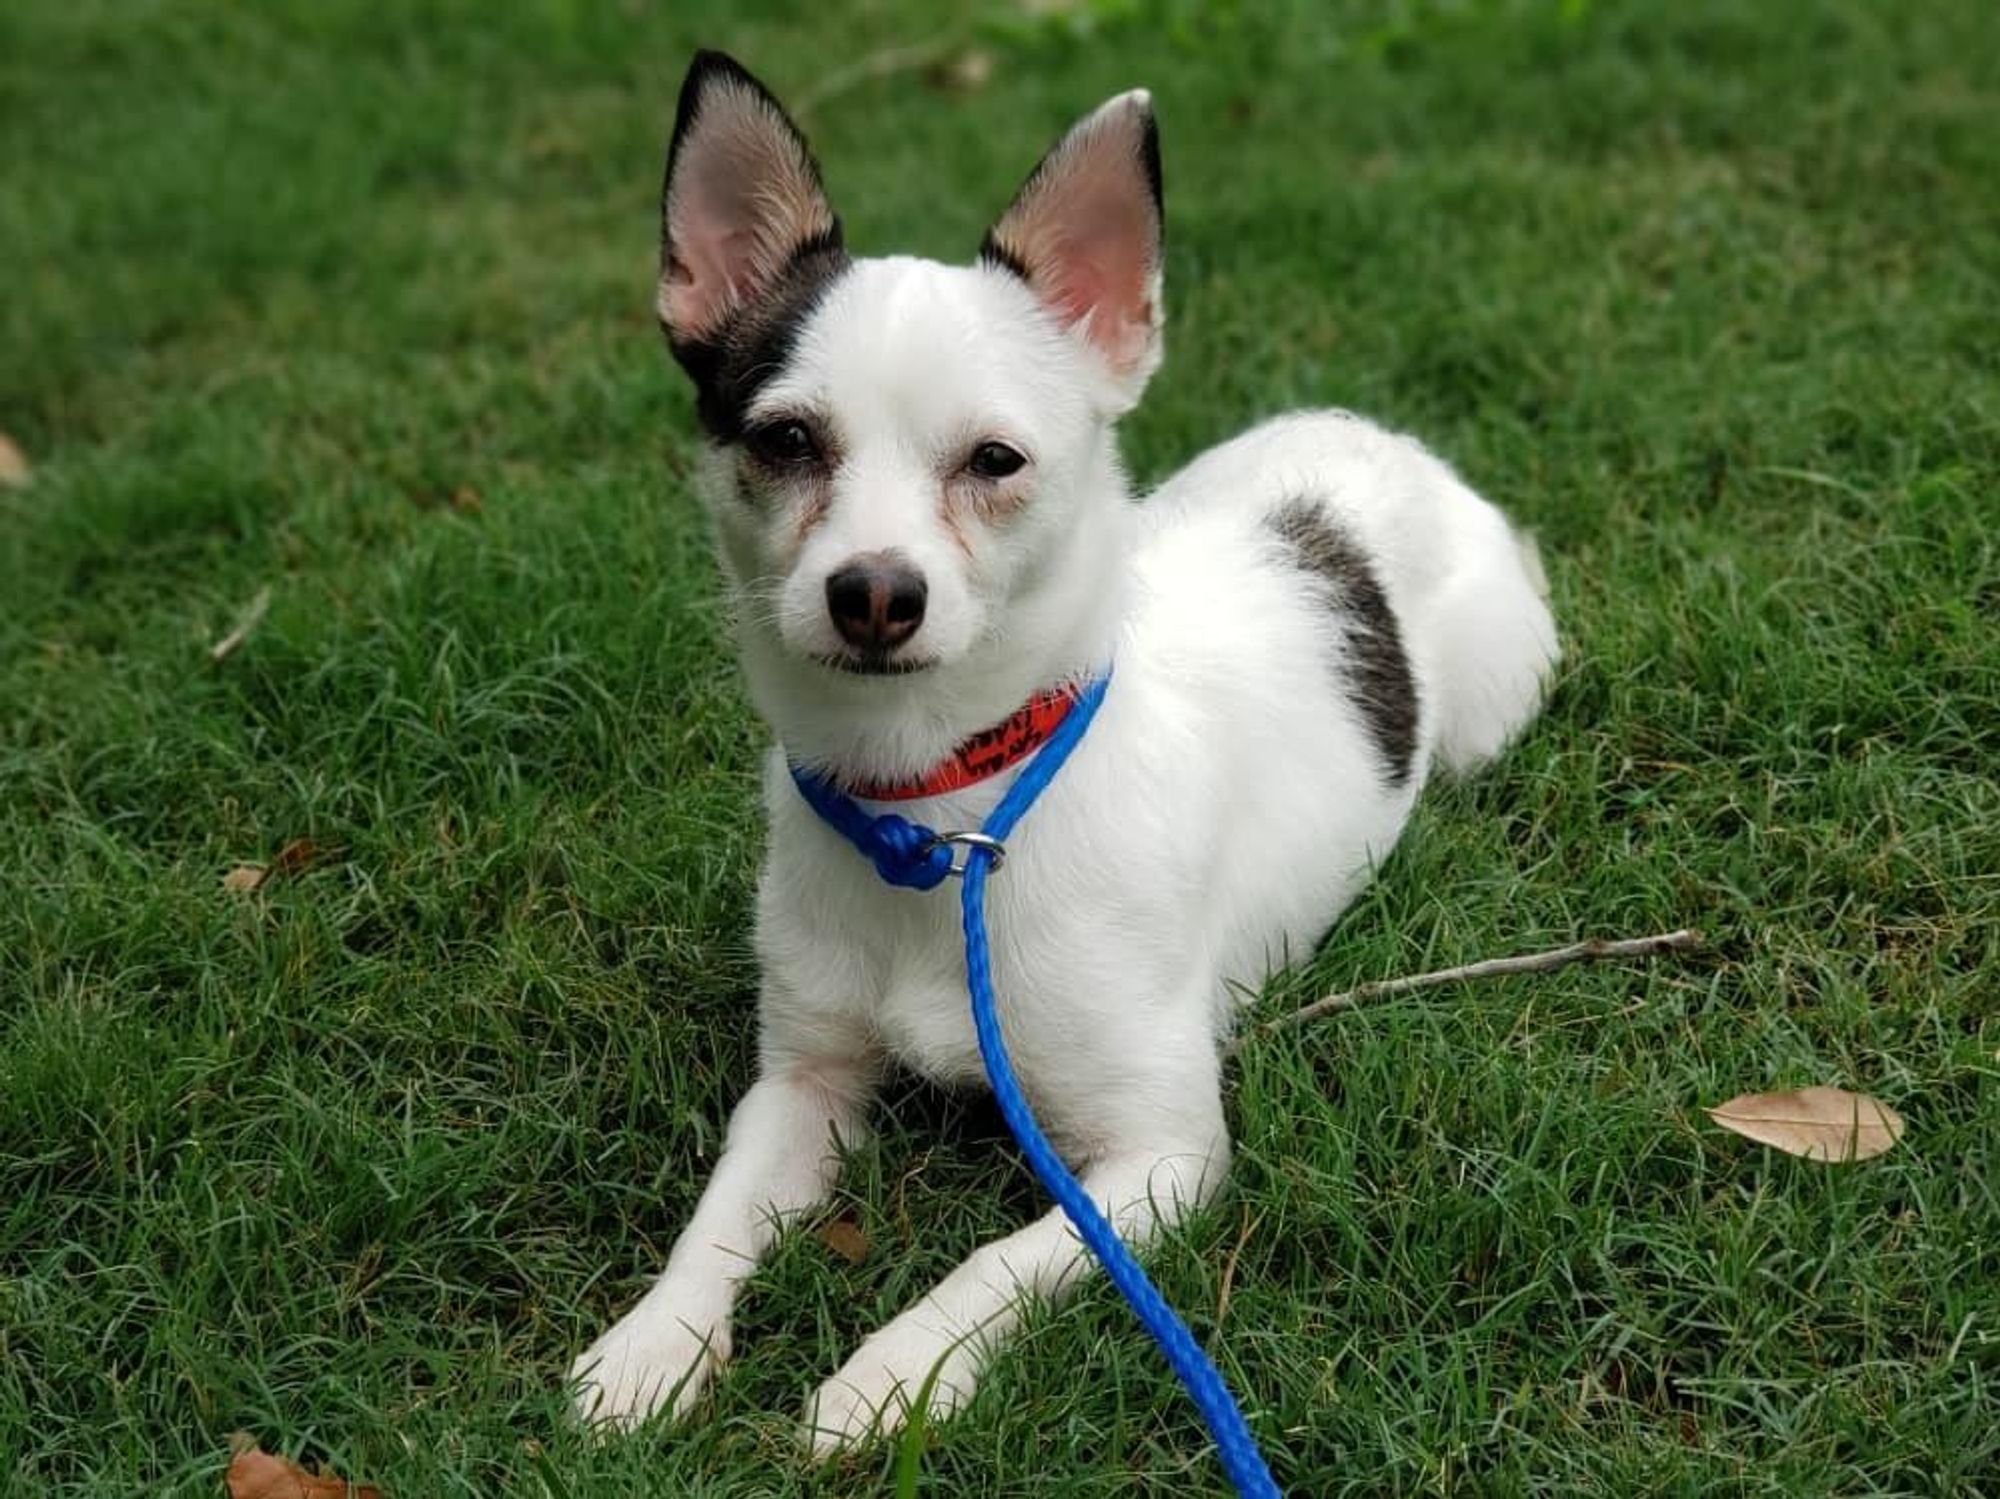 Pet of the week - Pixie Chihuahua mix